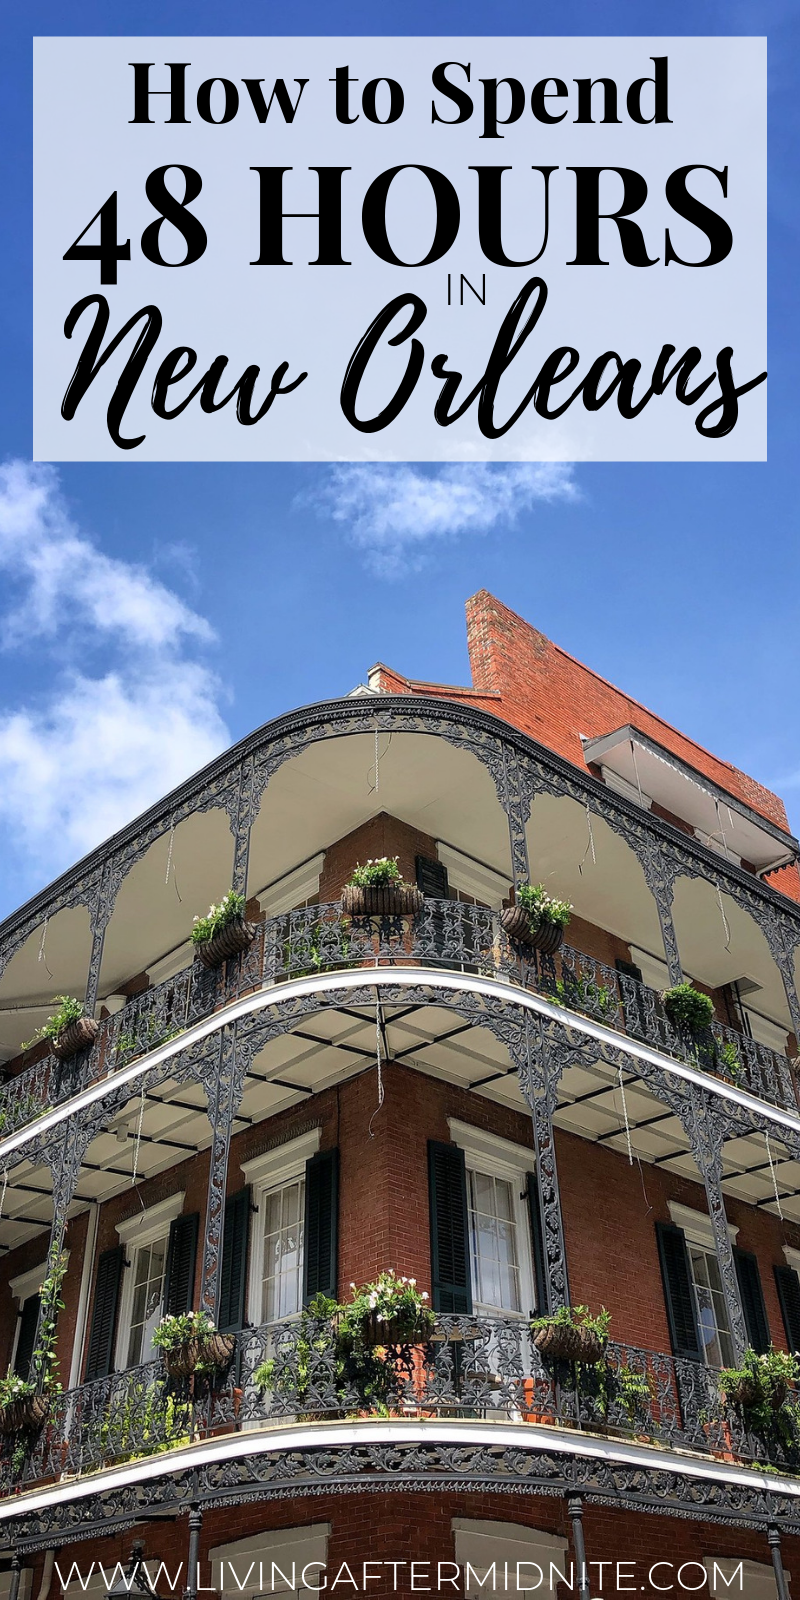 How to Spend 48 Hours in New Orleans in the Summer | New Orleans Travel Guide | What to do in New Orleans | 2 Days in New Orleans | Best Things to do in New Orleans | First Timer’s Guide to NOLA | NOLA Travel Guide | 2 Day Itinerary for New Orleans 